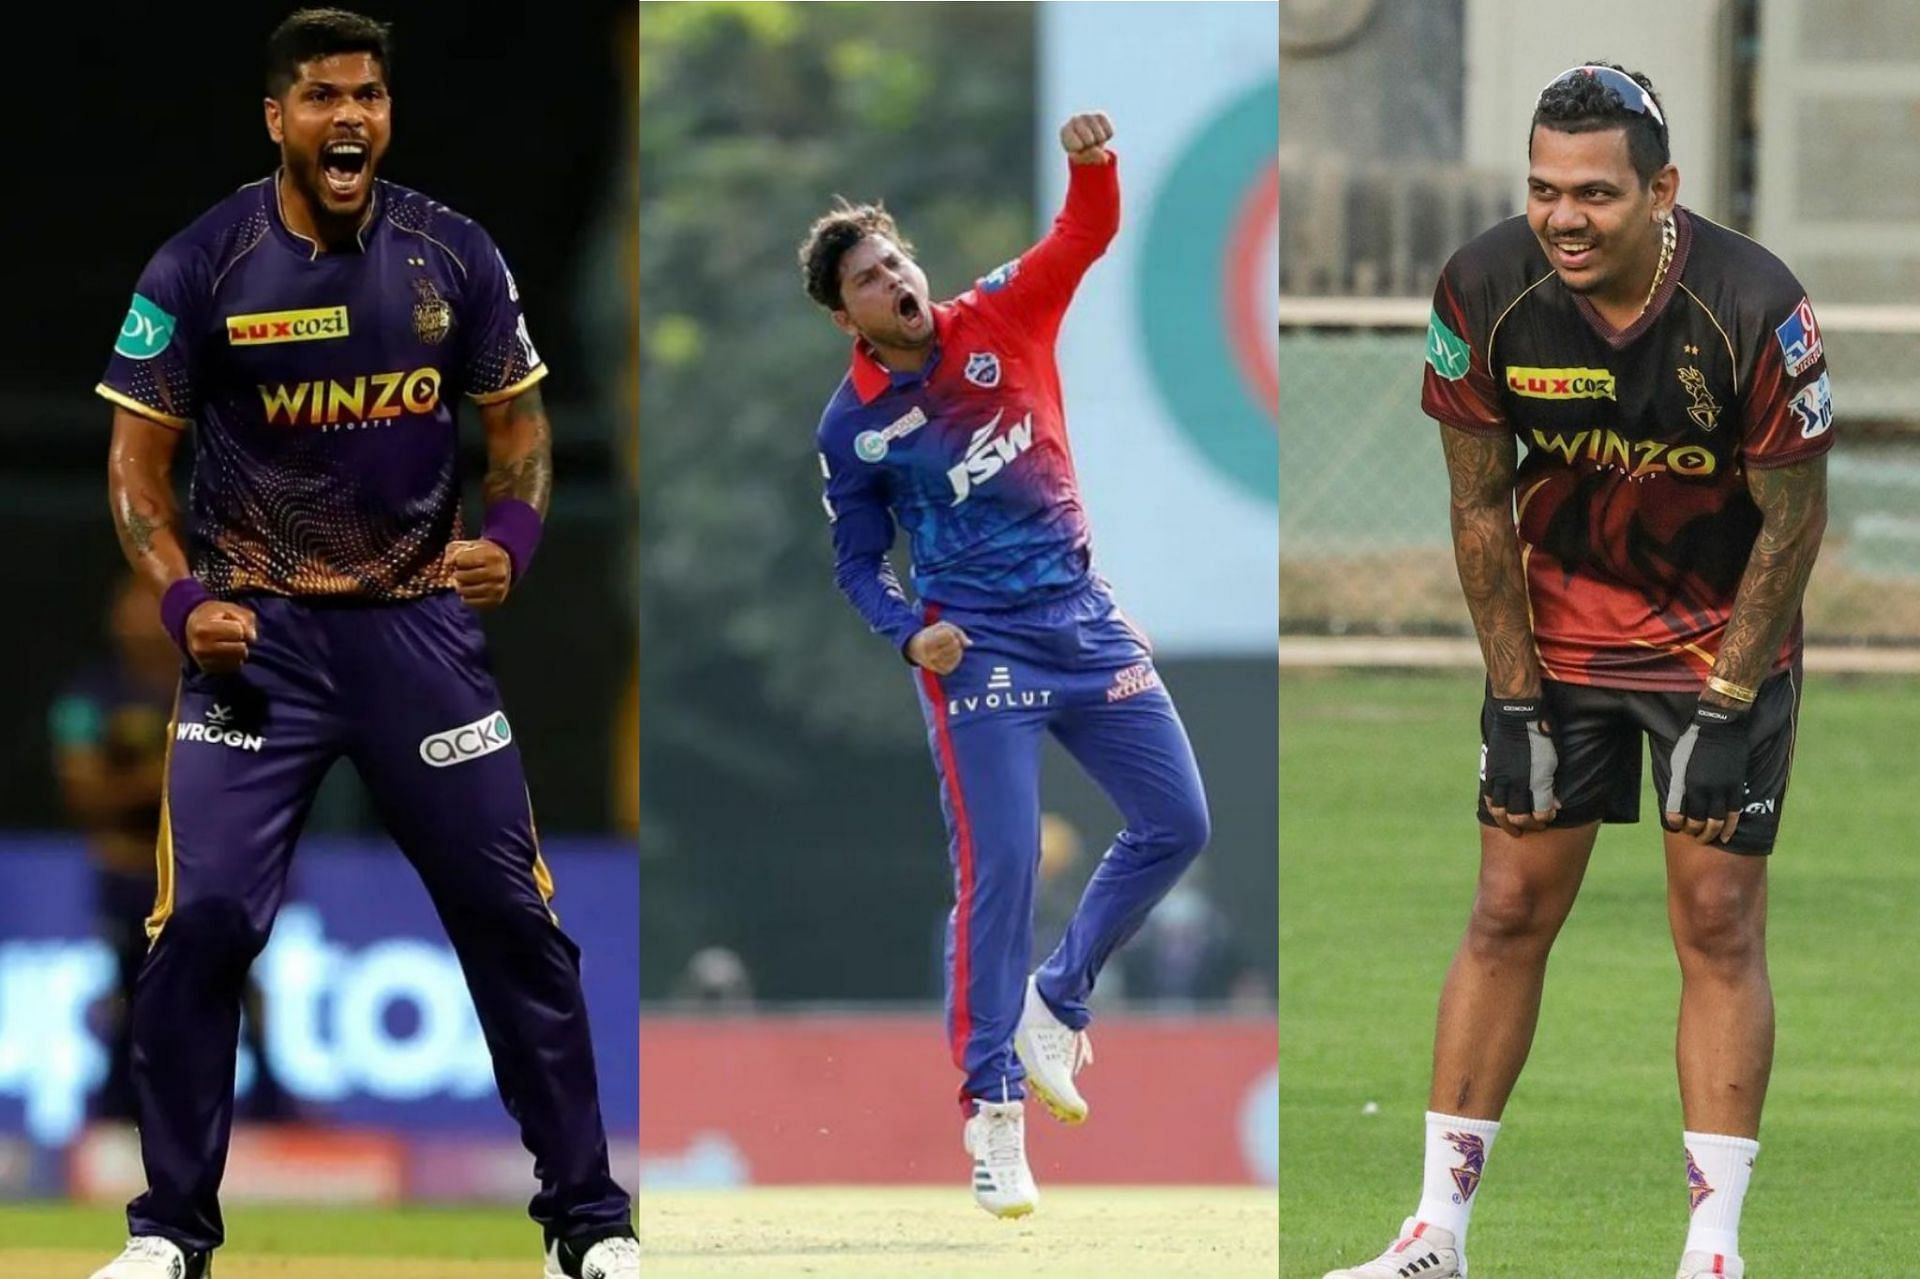 Match 19 of the IPL 2022 will be played between Kolkata Knight Riders and Delhi Capitals